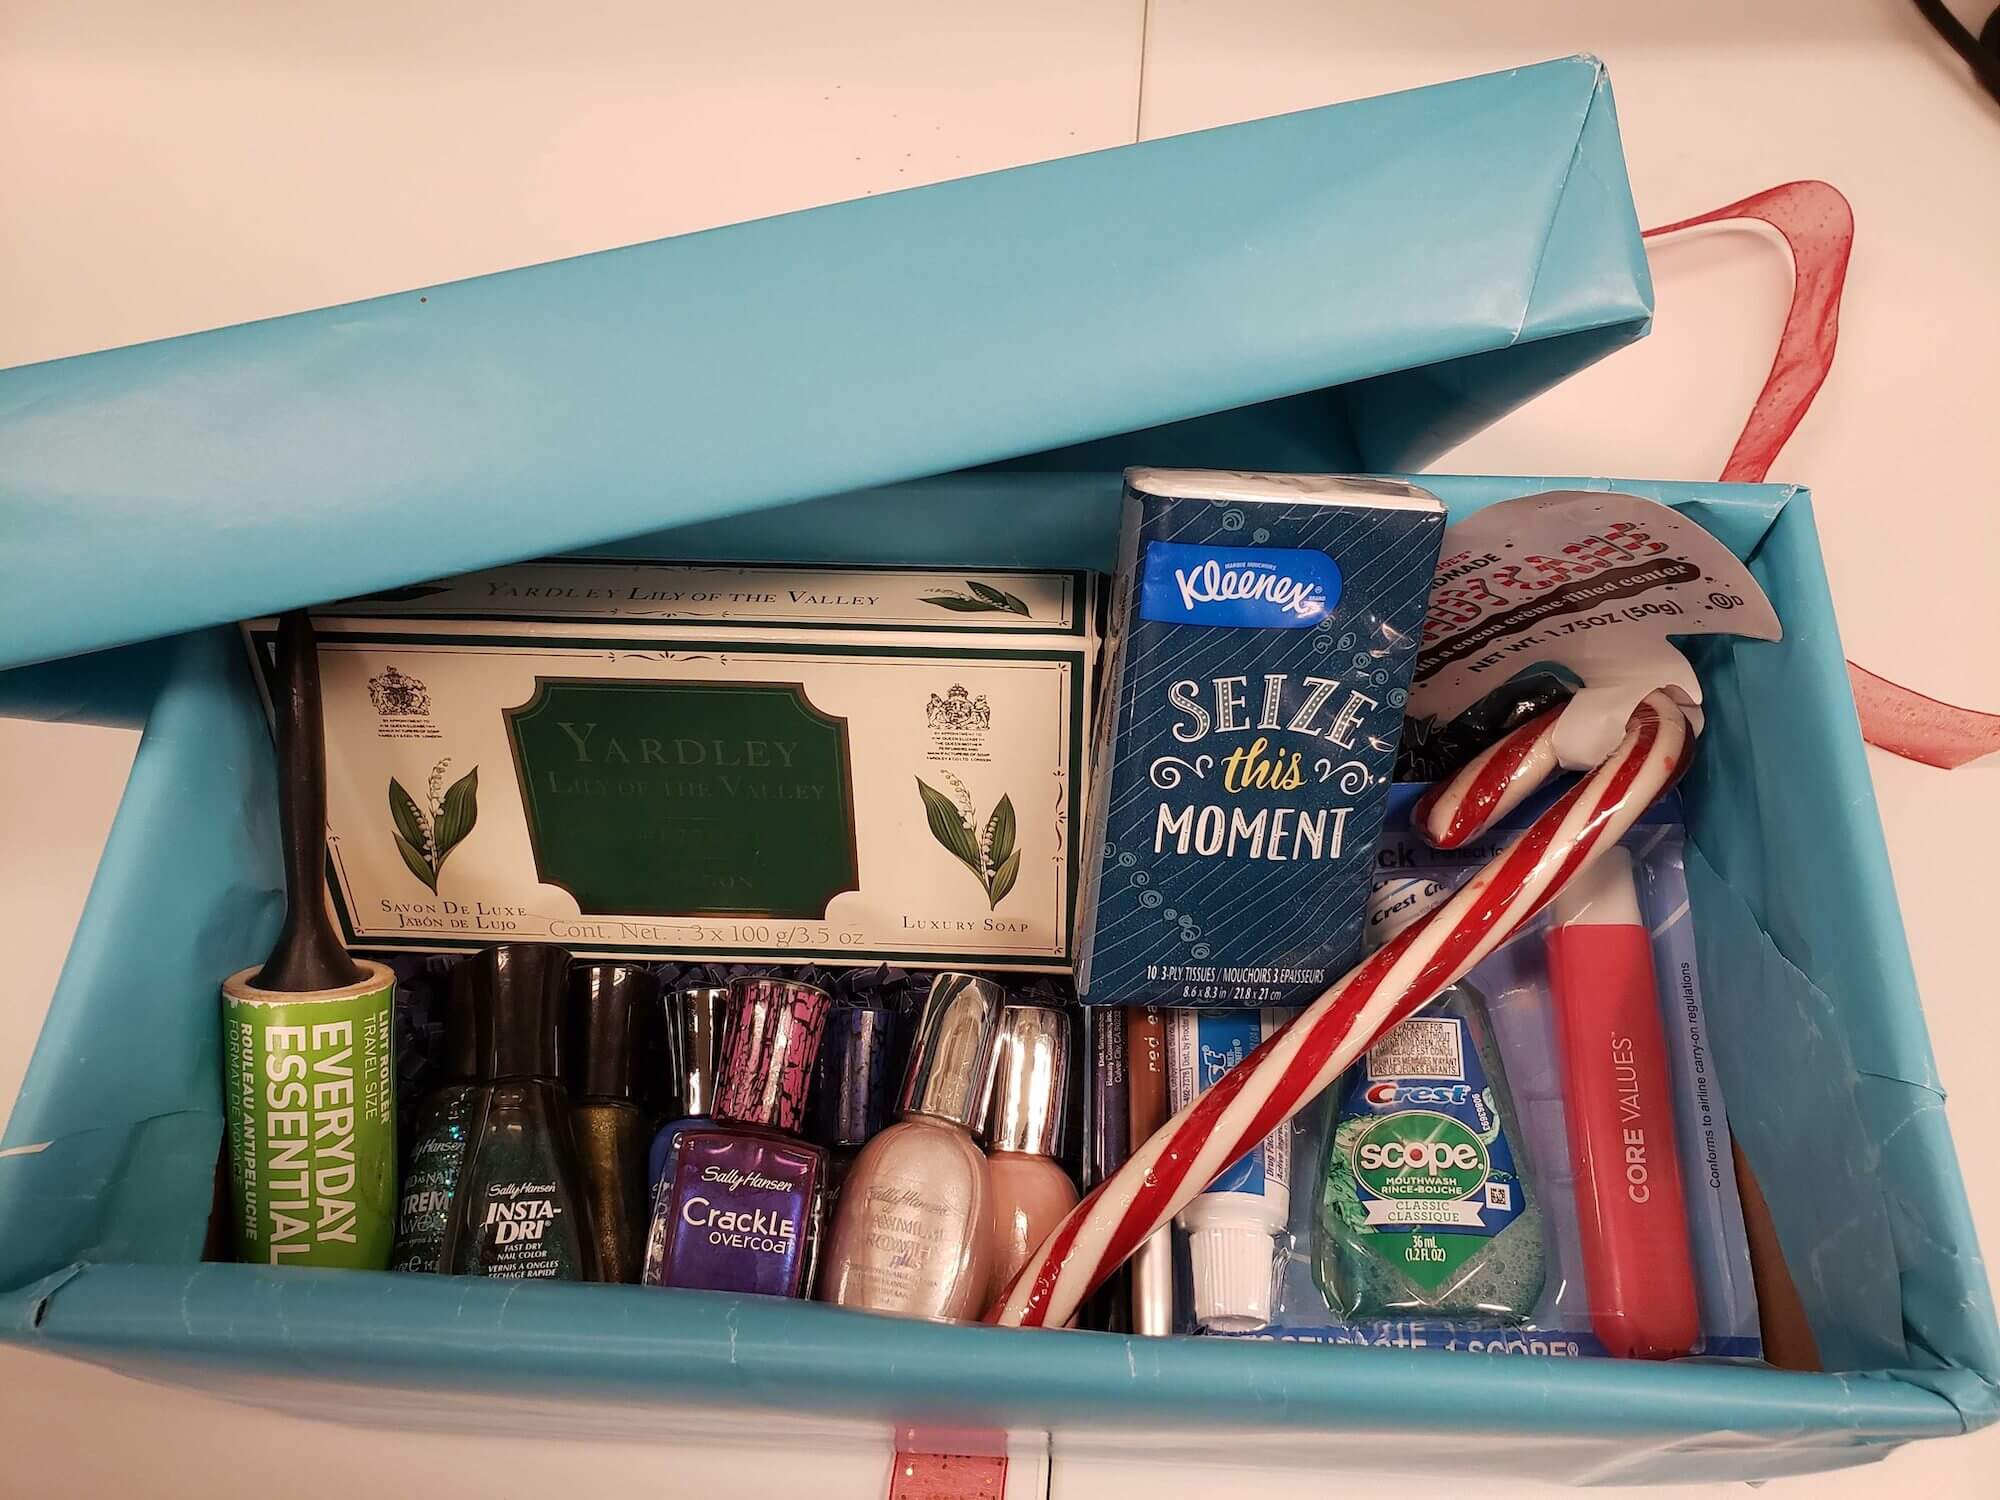 Shoe box with nail polish, tissues, and a candy cane